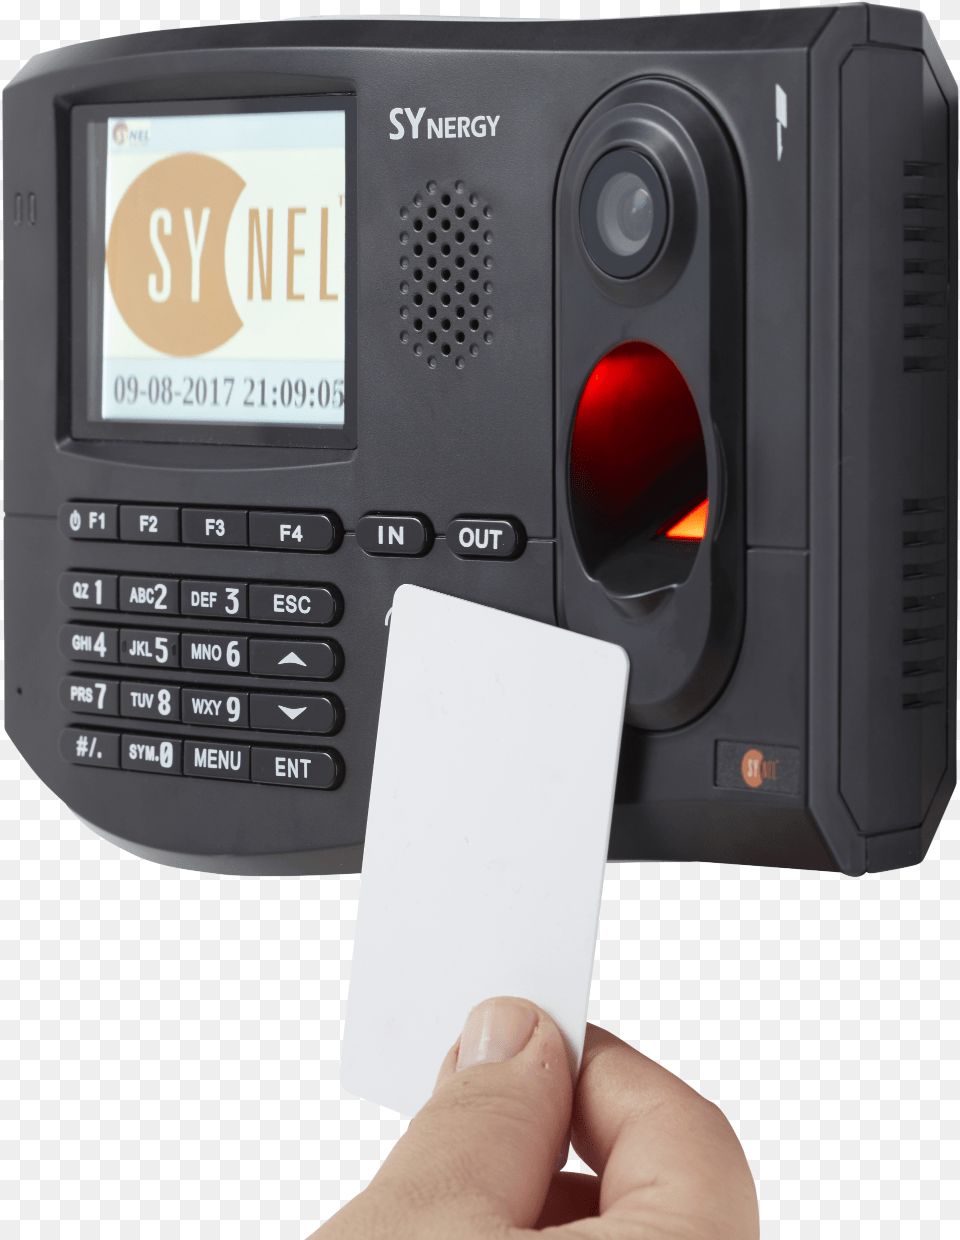 Synergy Card Low Gadget, Electronics, Computer Hardware, Hardware, Monitor Free Png Download